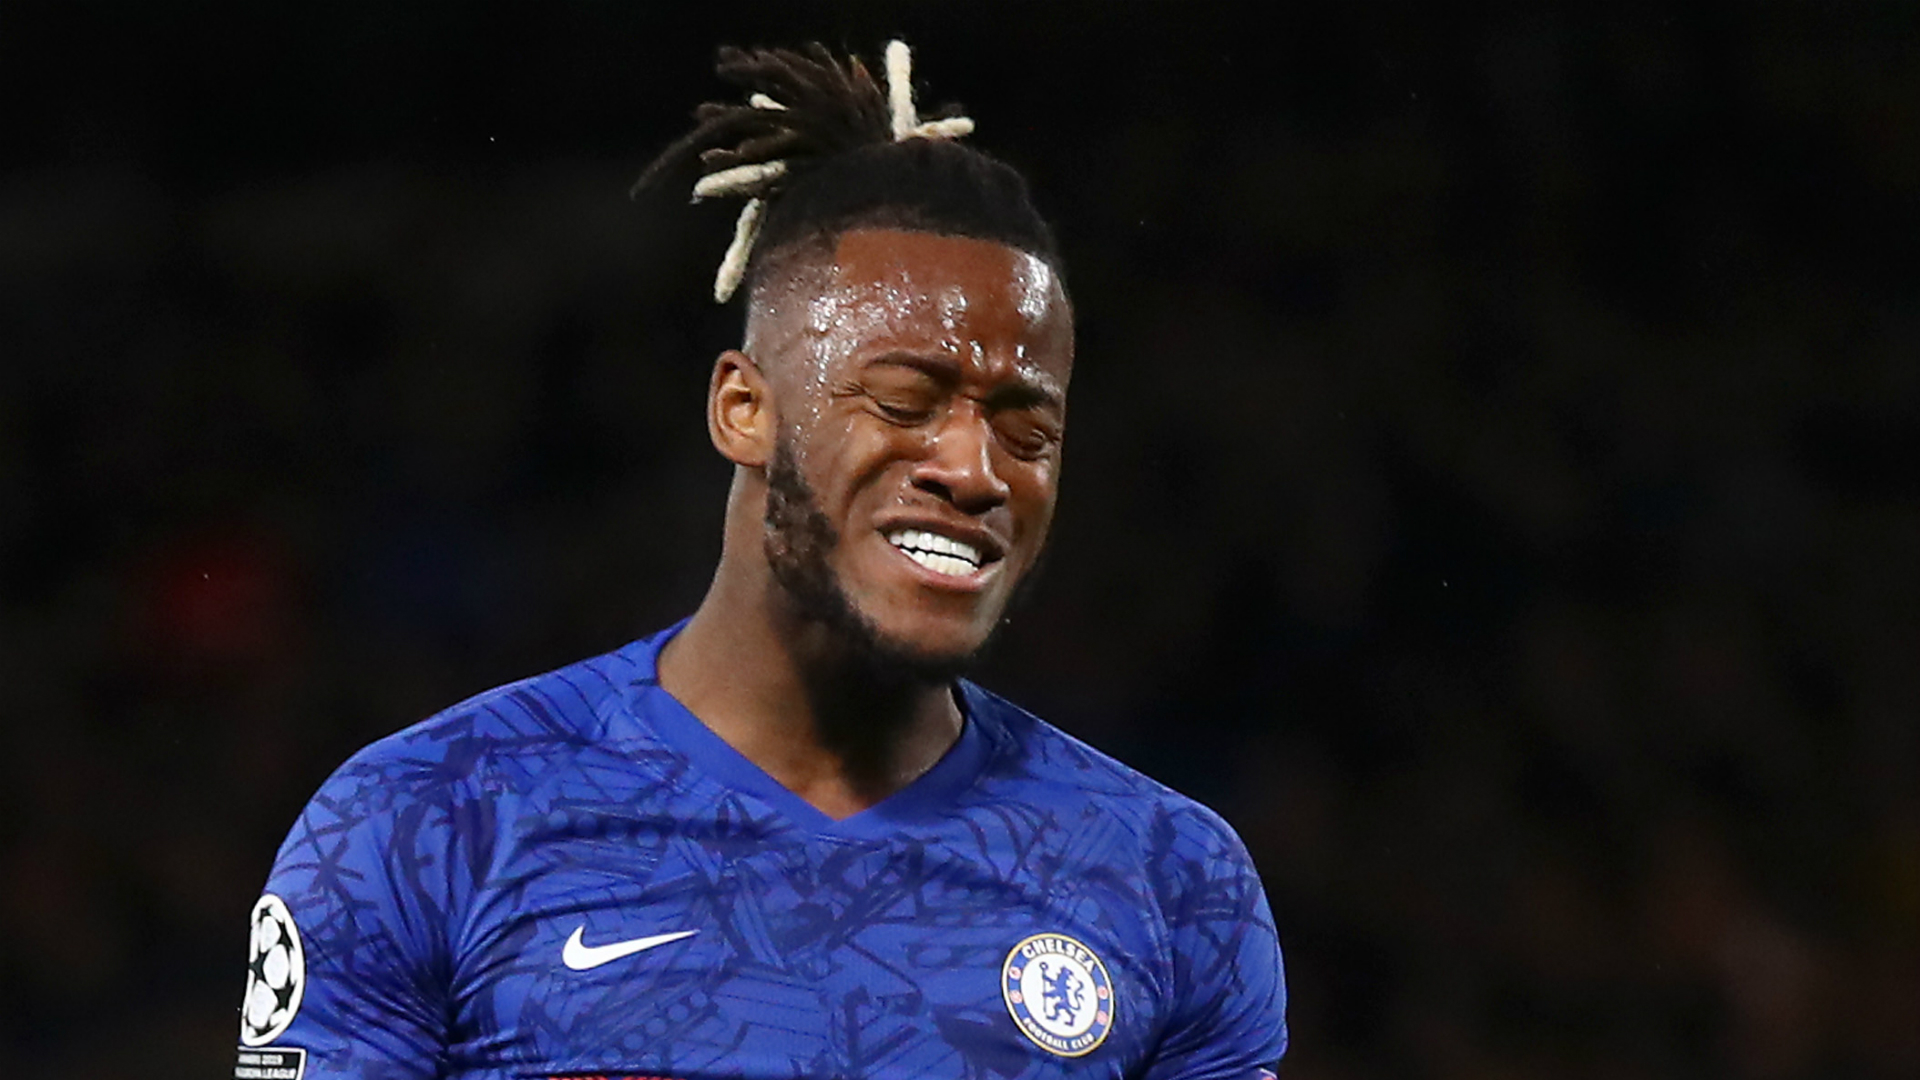 Should Michy Batshuayi stay or go let’s hear your thoughts